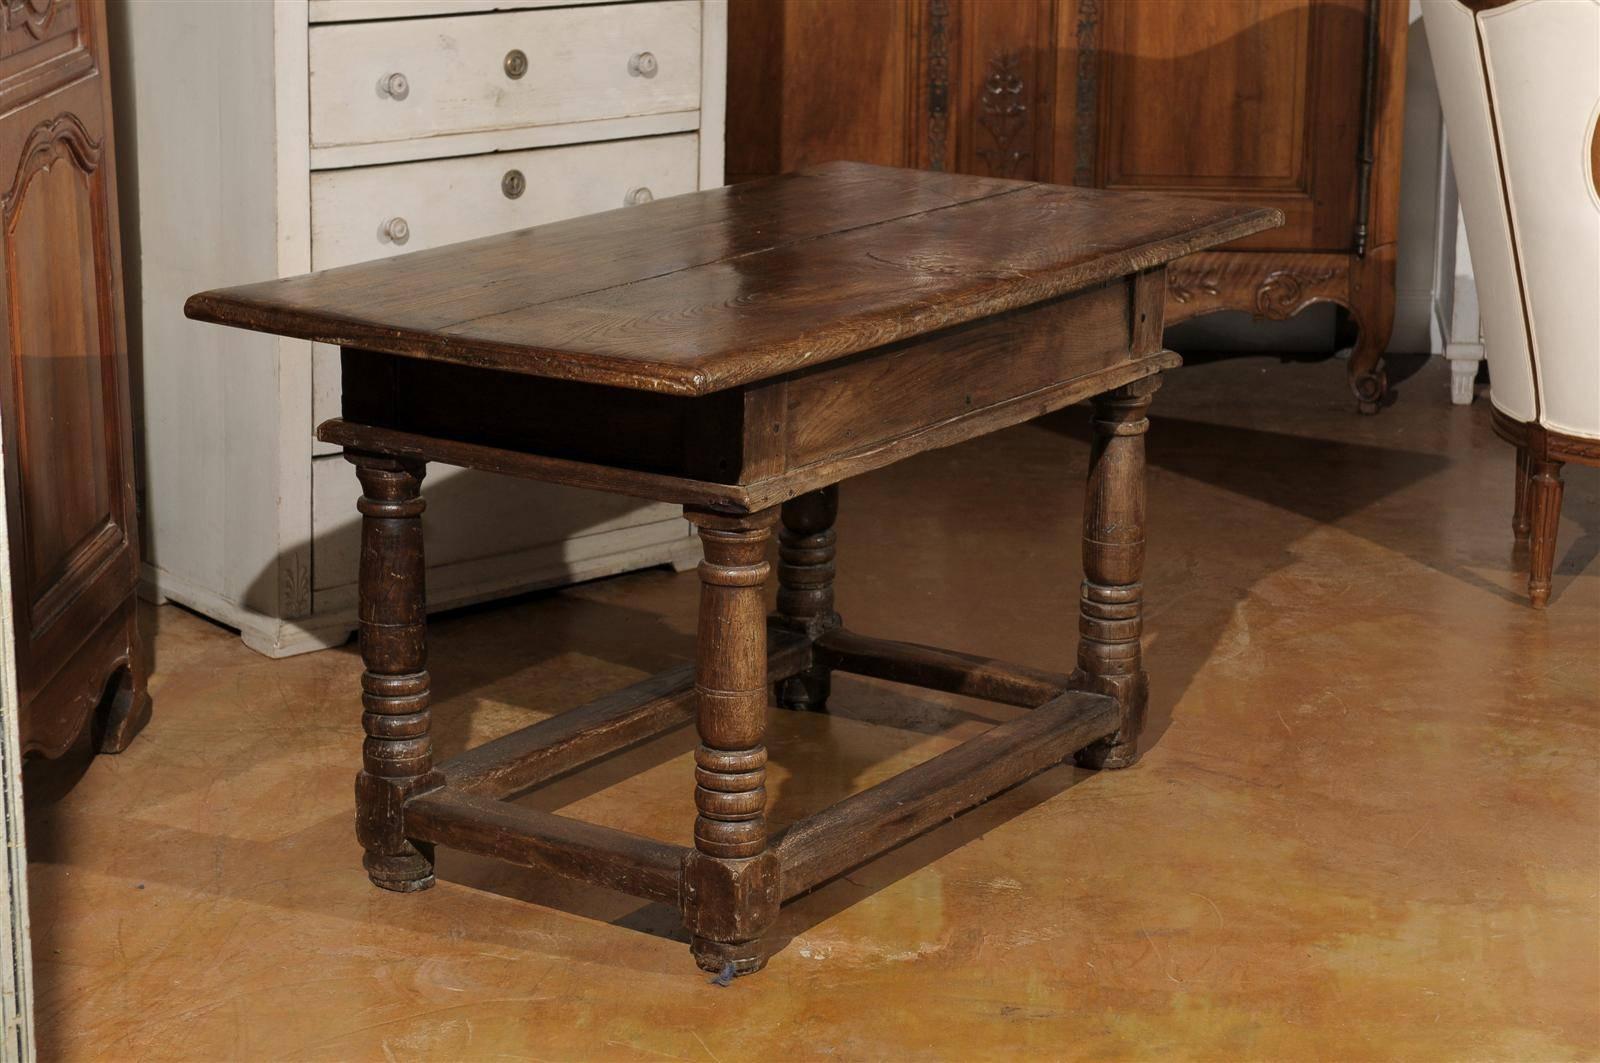 A French mid 18th century walnut library table of the Louis XV period with two drawers and original hardware. Born during the reign of King Louis XV, this French walnut table offers a stark contrast with the Rococo silhouettes typical of the era.